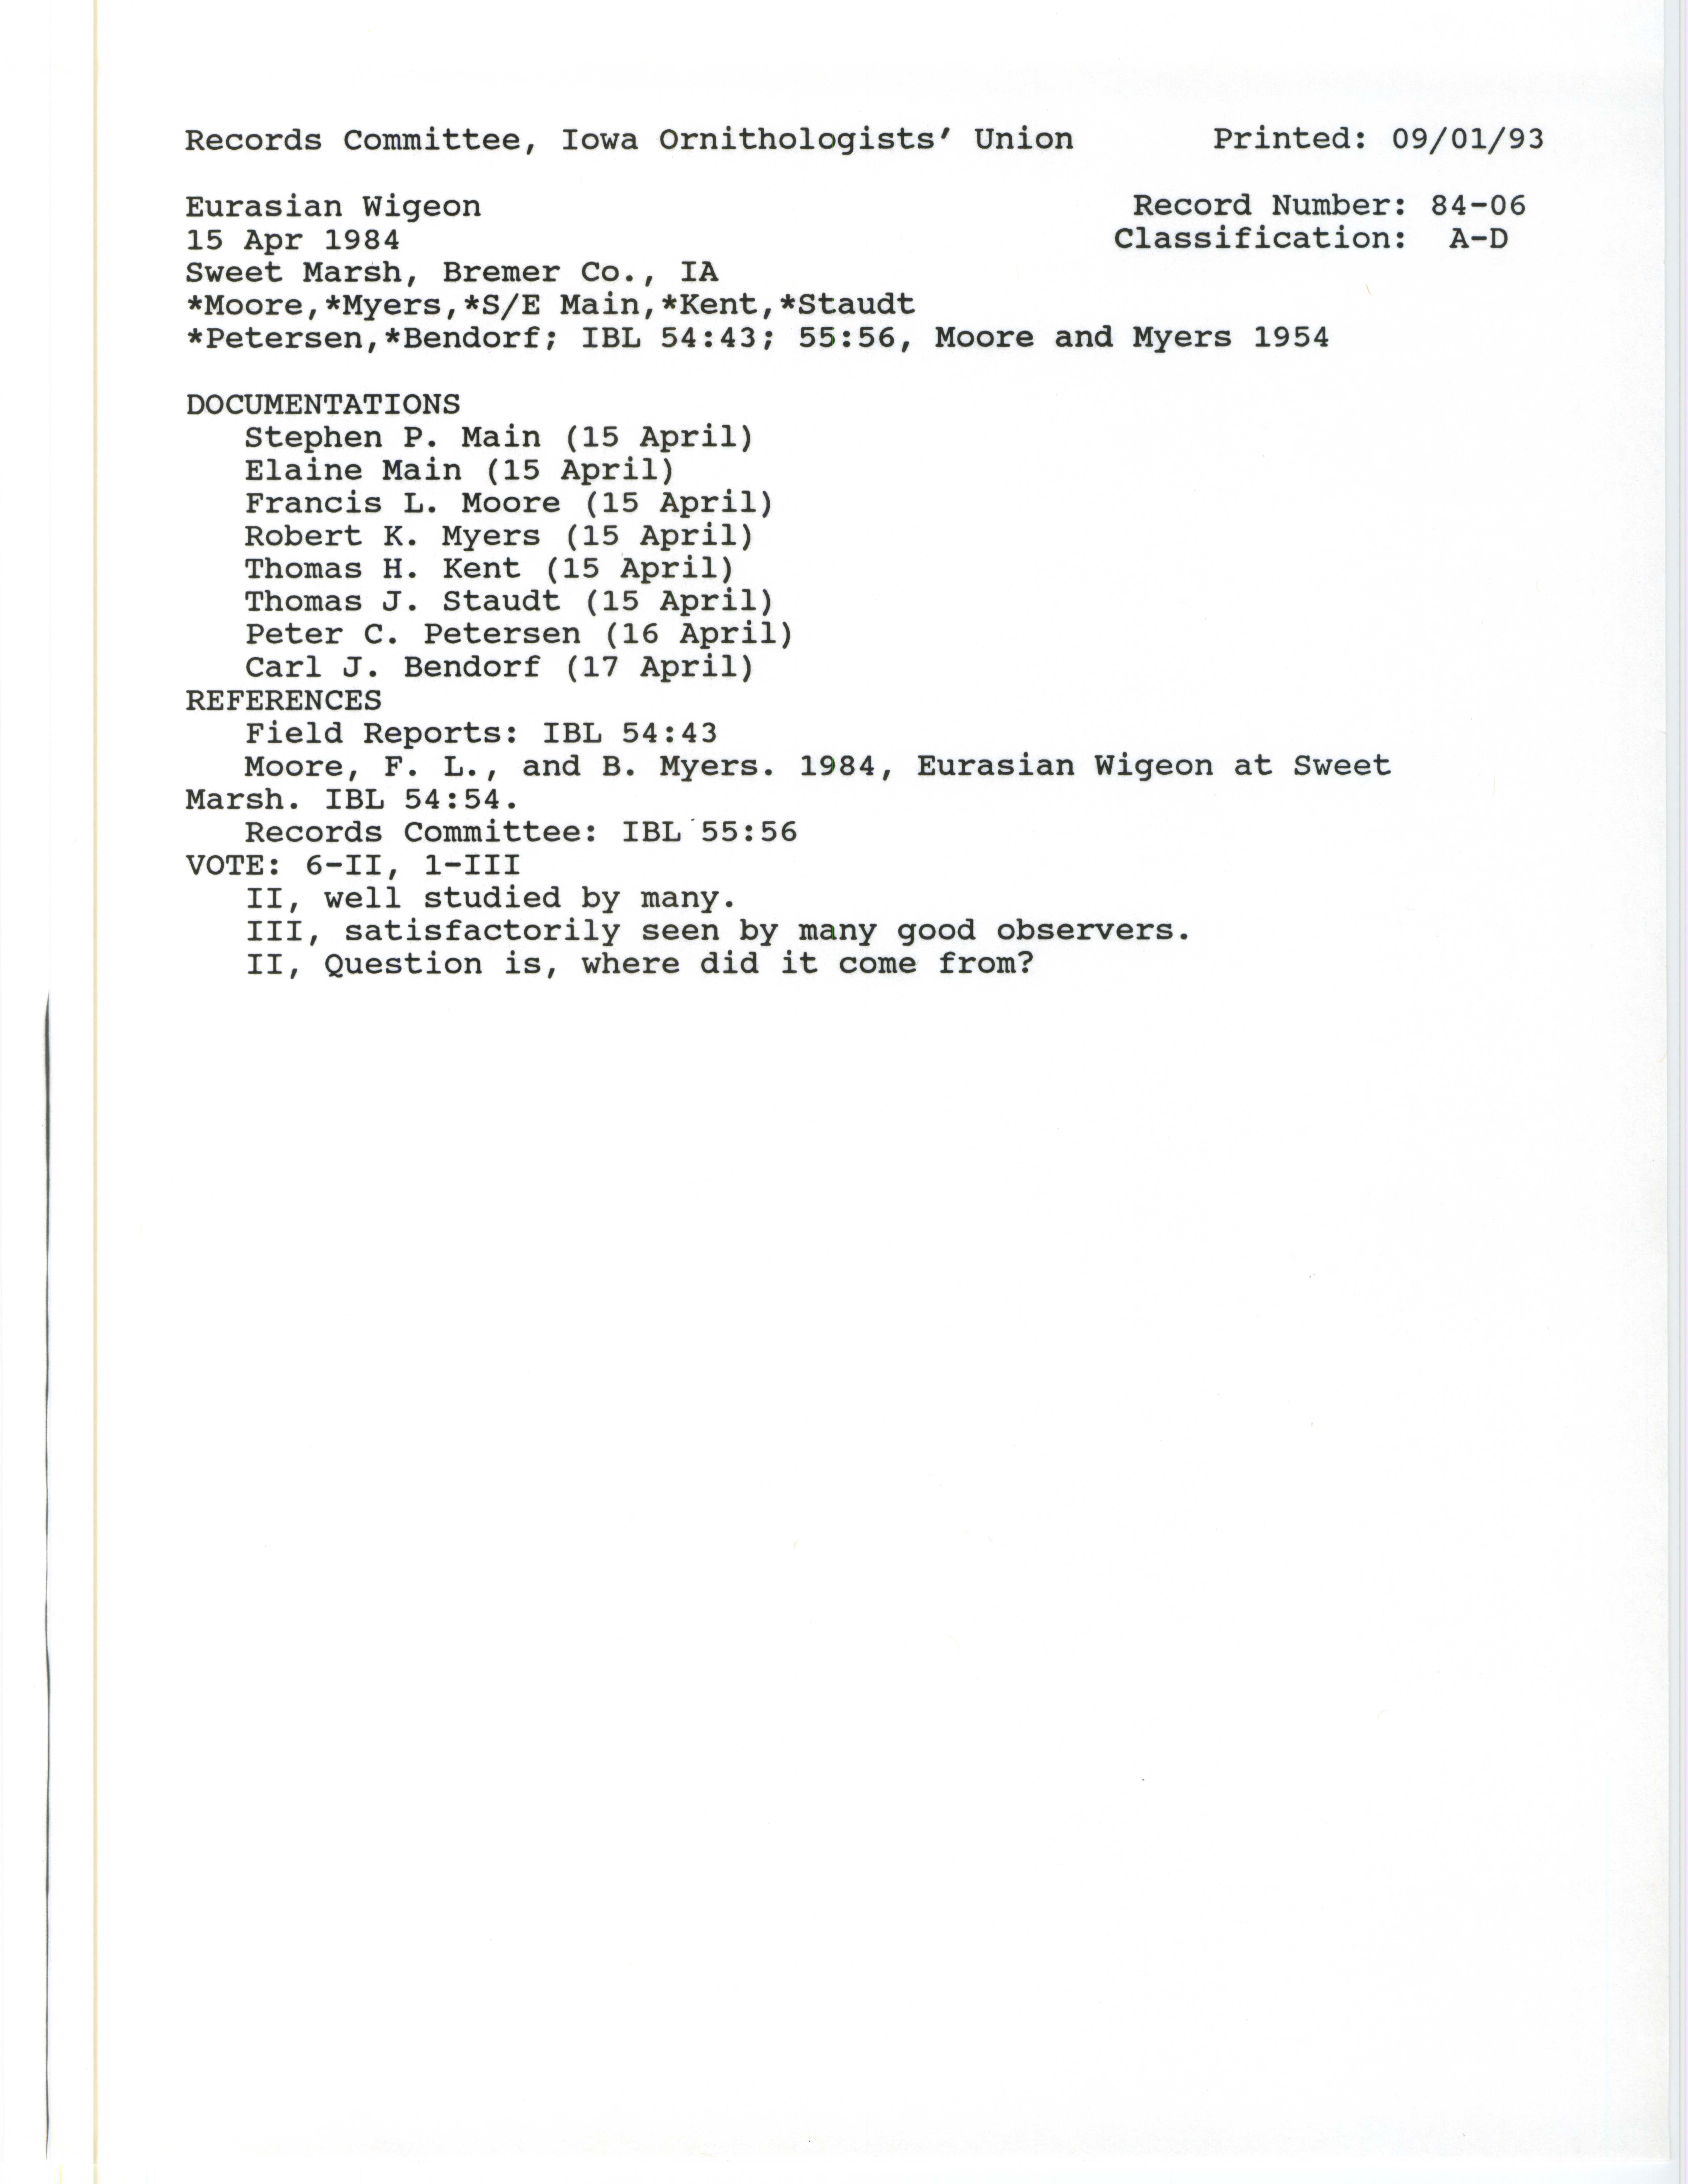 Records Committee review for rare bird sighting of Eurasian Wigeon at Sweet Marsh, 1984